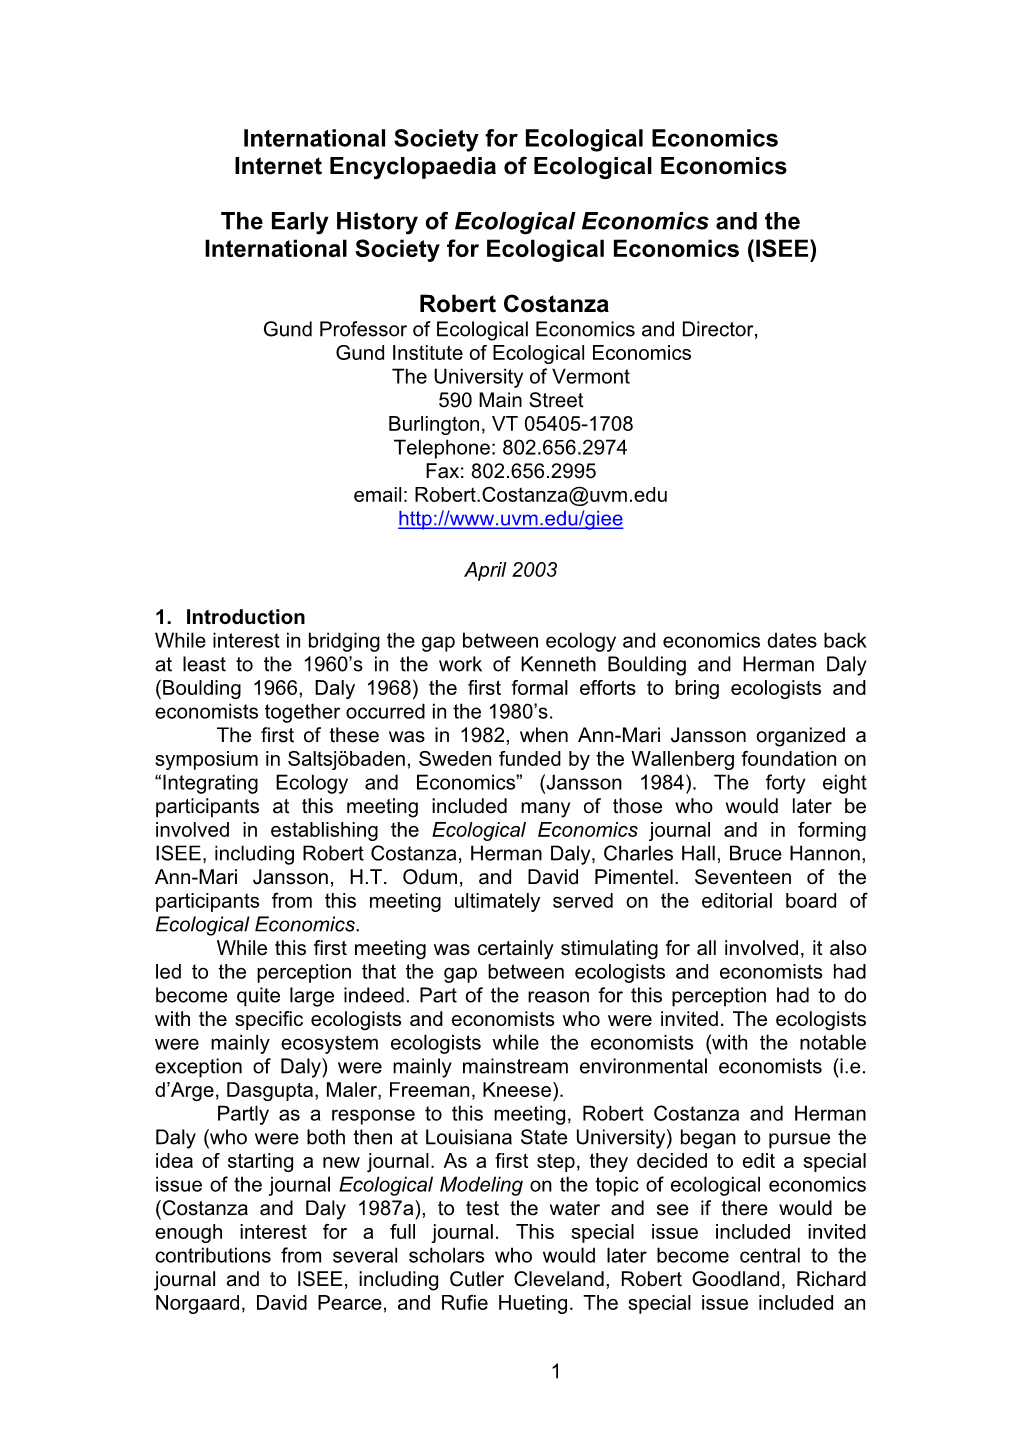 The International Society for Ecological Economics (ISEE)